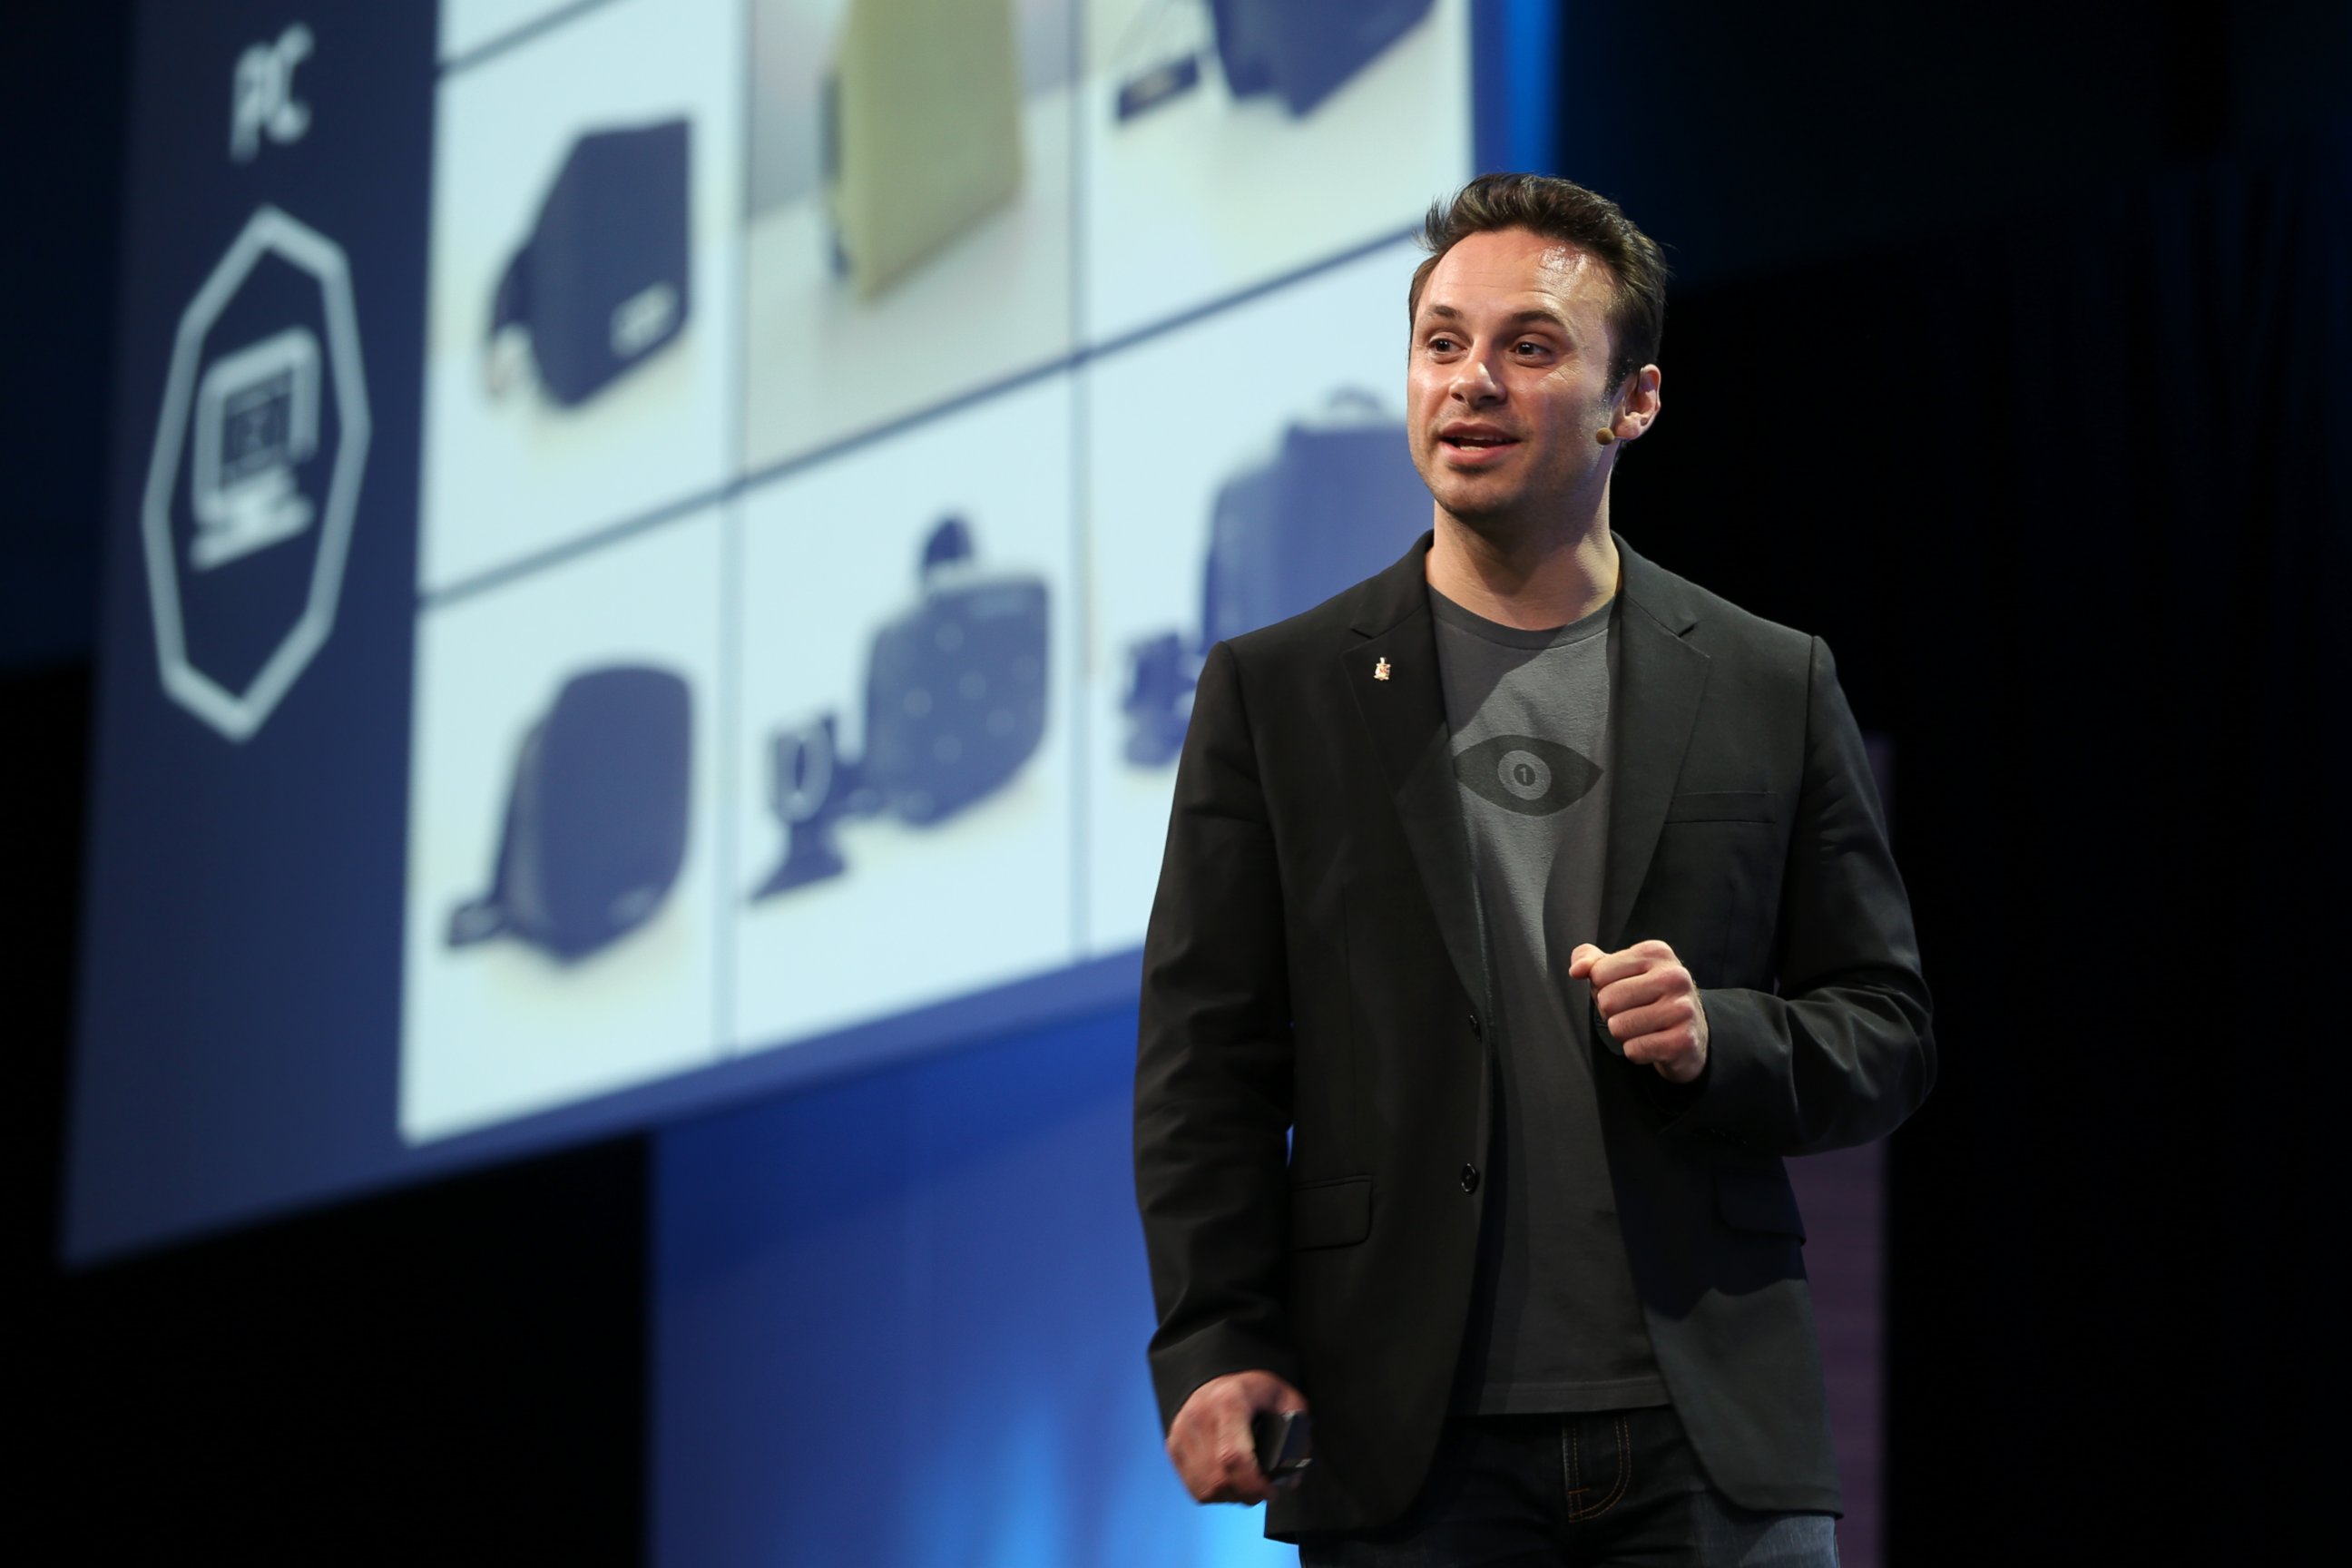 PHOTO: Brendan Iribe, Oculus CEO, speaks at f8, Facebook's Developers Conference in San Francisco, March 25, 2015.